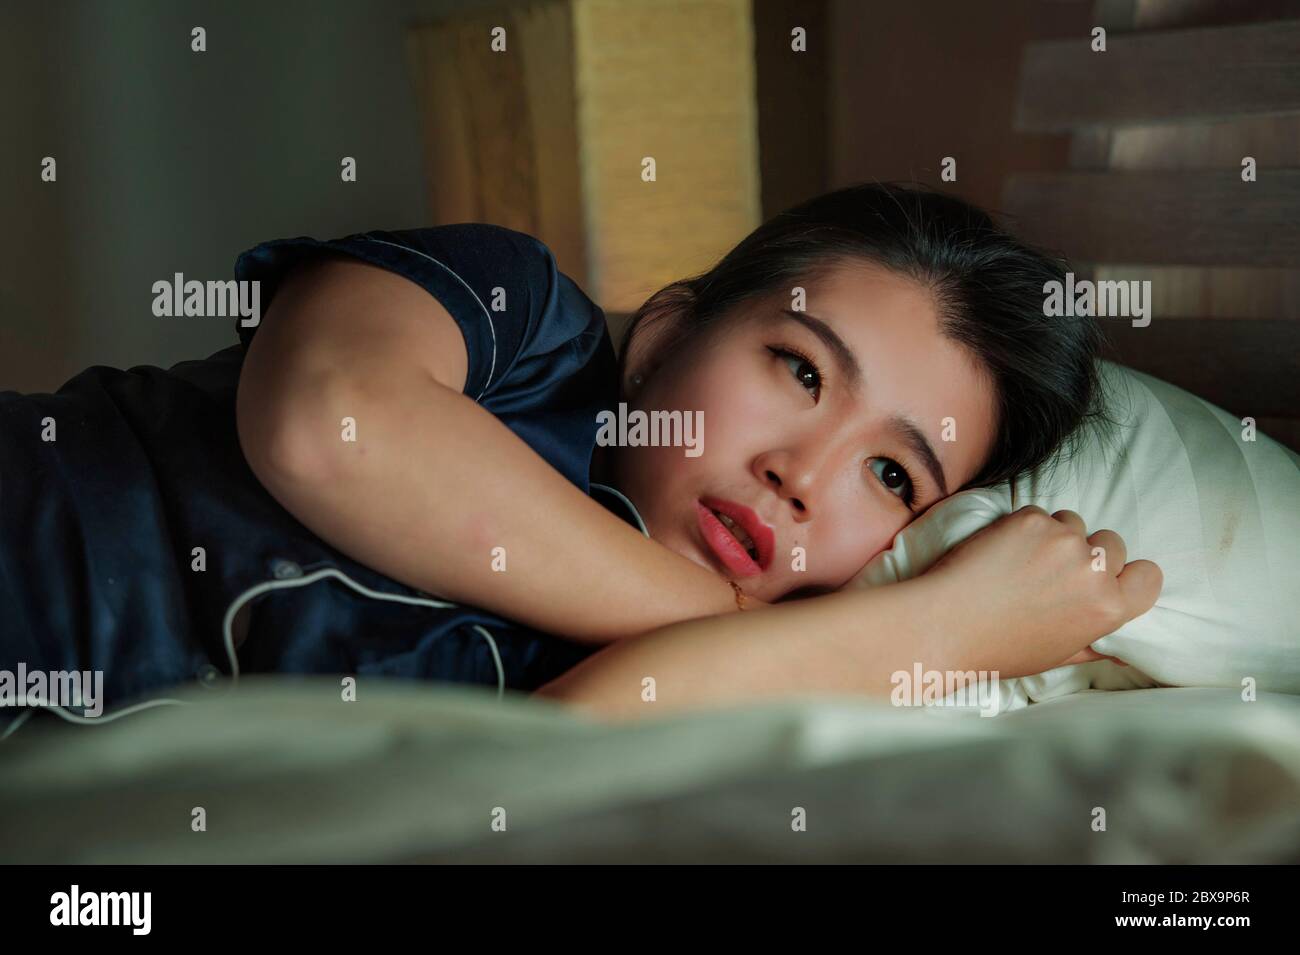 home lifestyle portrait of young beautiful sad and depressed Asian Chinese woman awake in bed late night suffering anxiety crisis and depression probl Stock Photo picture photo